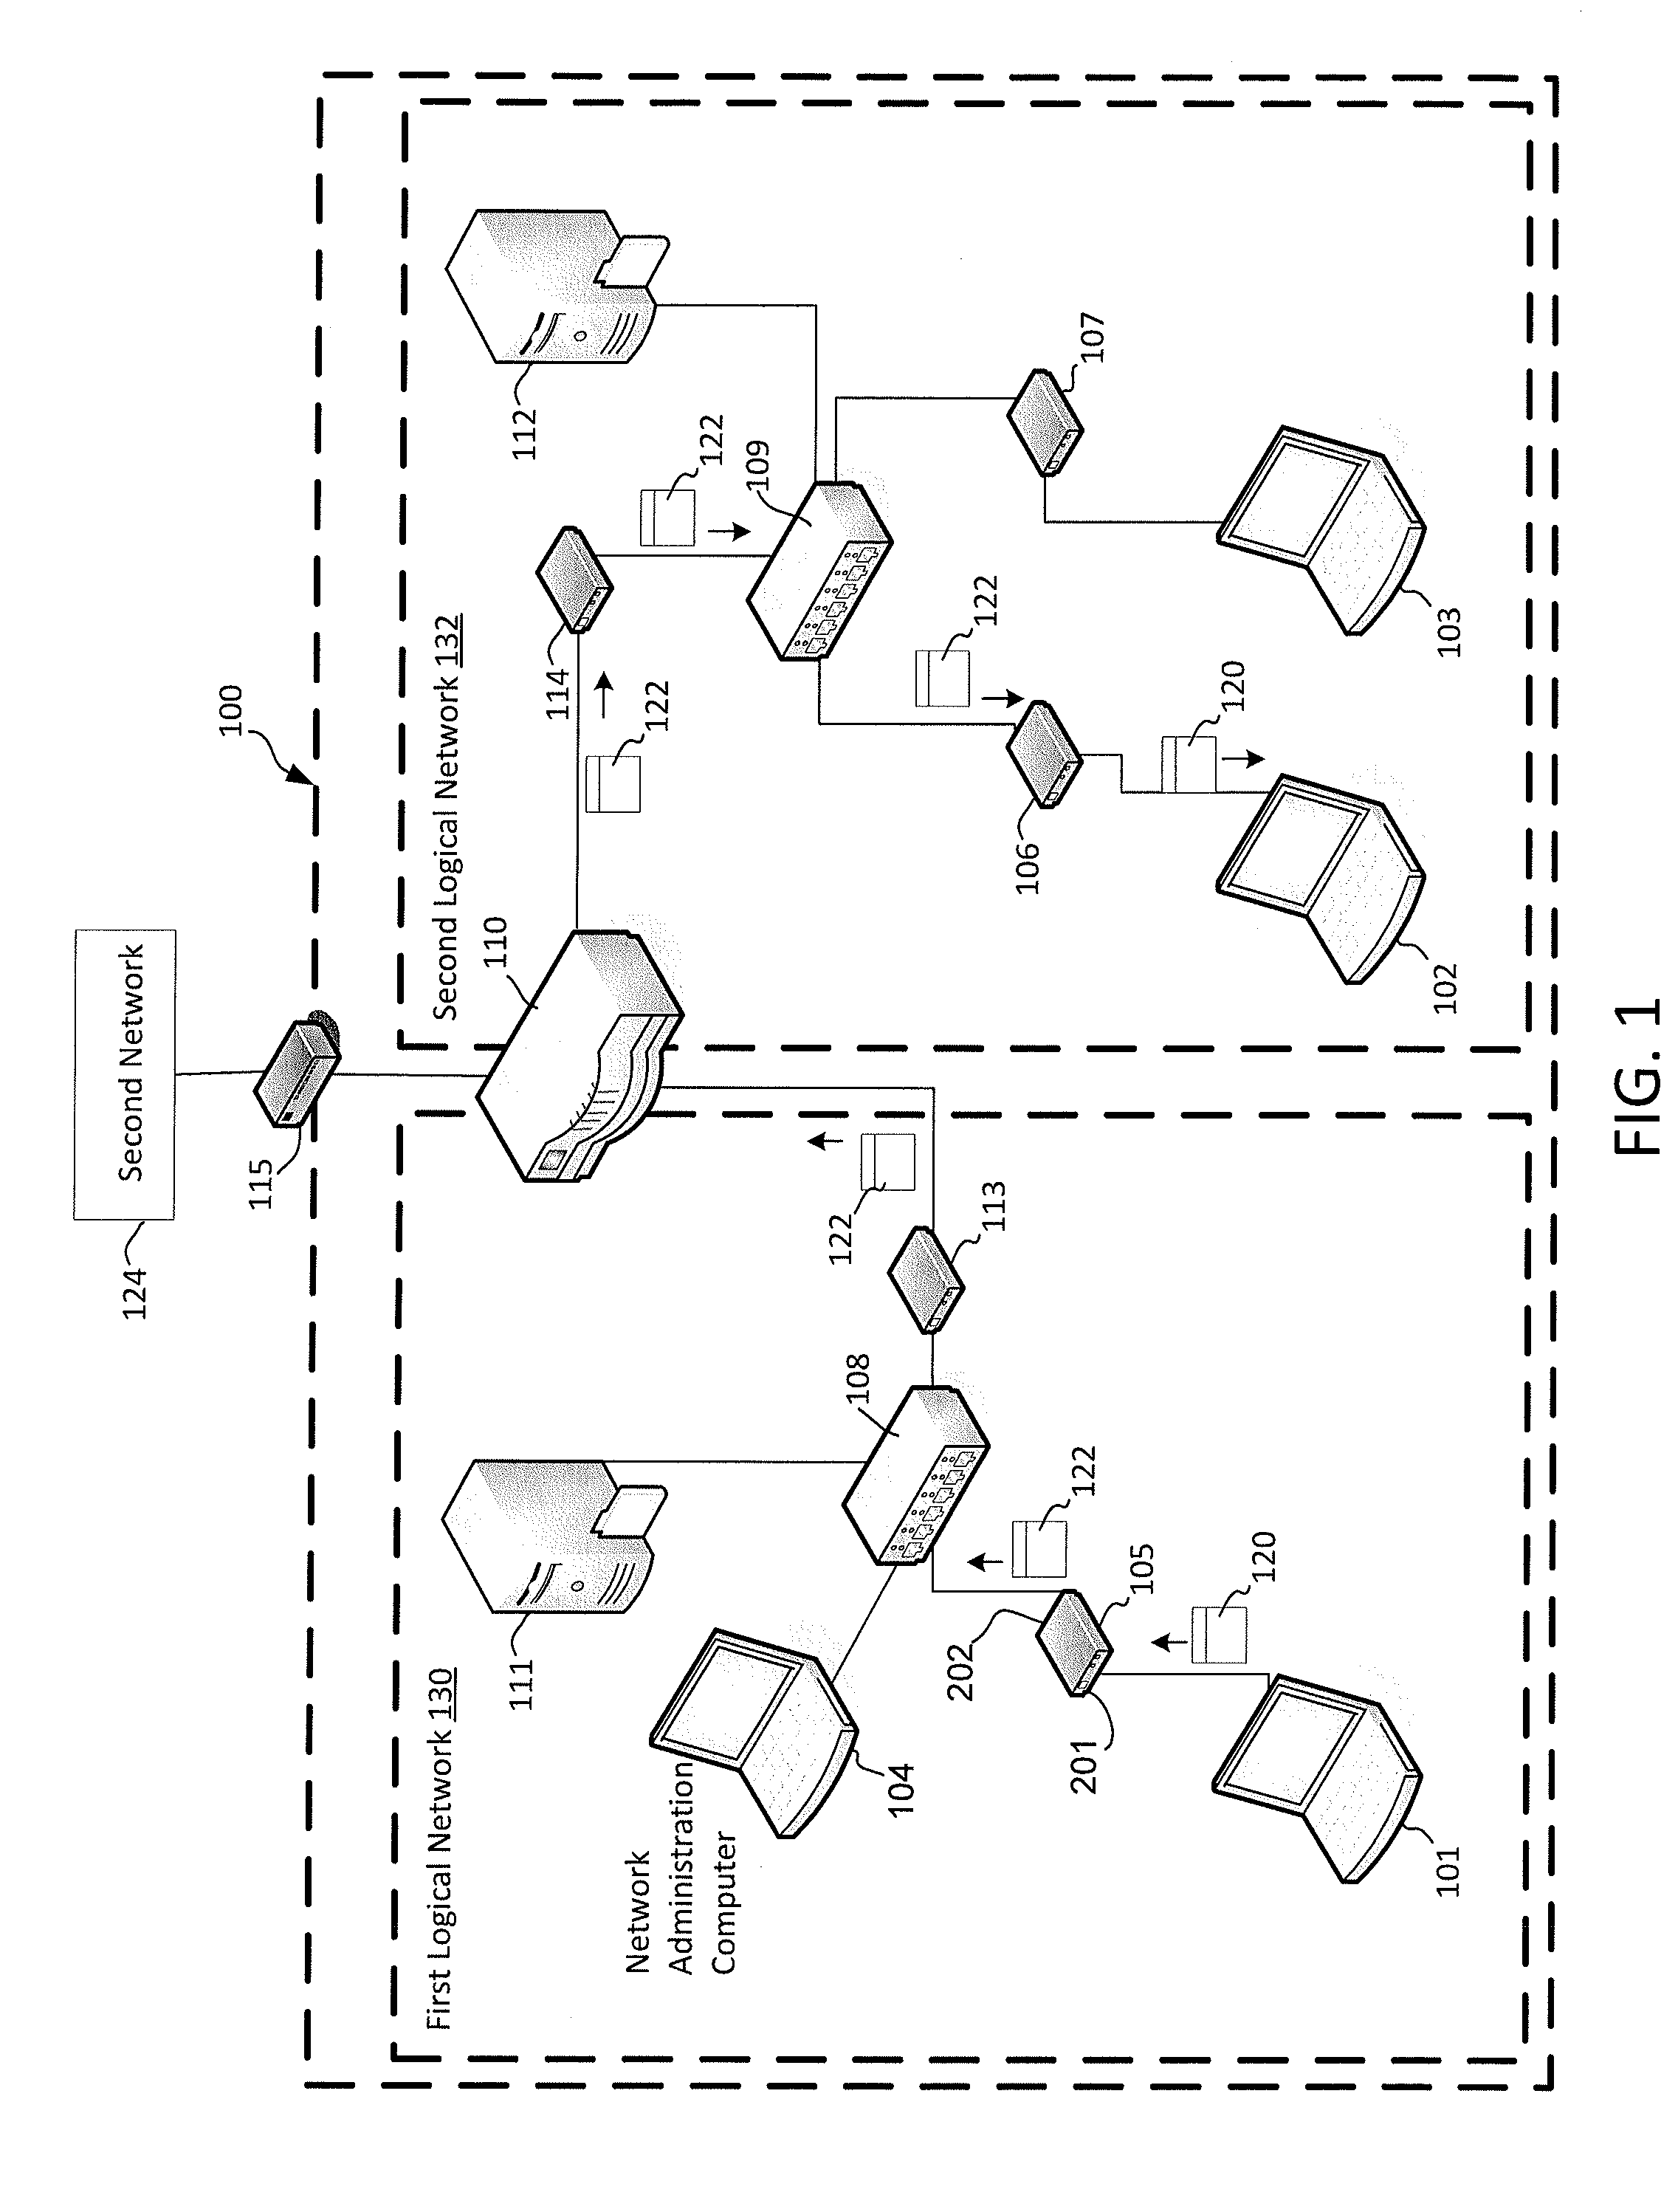 Firewalls for filtering communications in a dynamic computer network